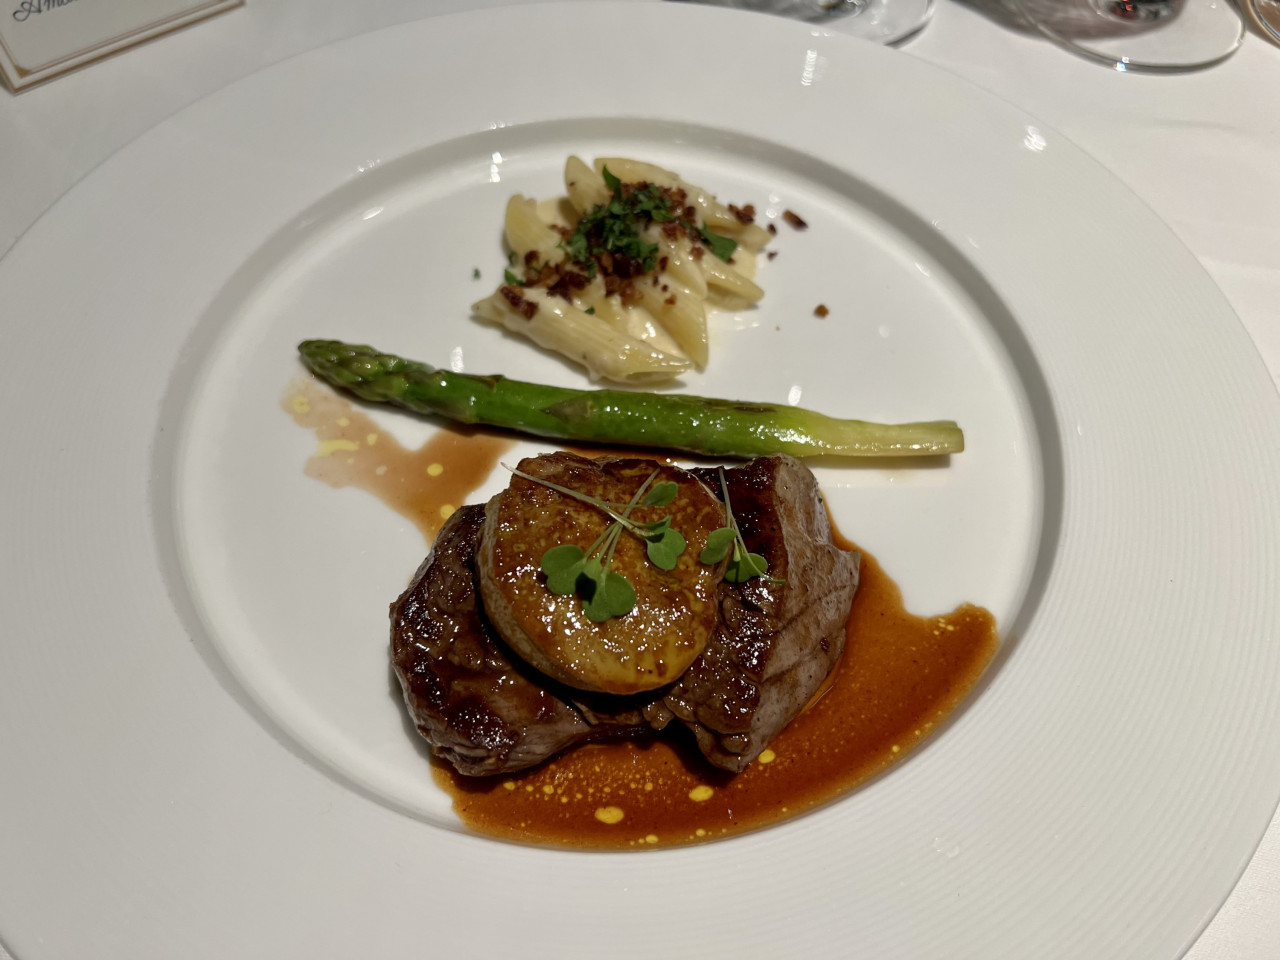 The 2019 Undurraga T.H. Syrah Leyda was paired with the ‘Rossini’ steak dish (served with penne pasta and red wine sauce). —The Vibes pic/Amalina Kamal